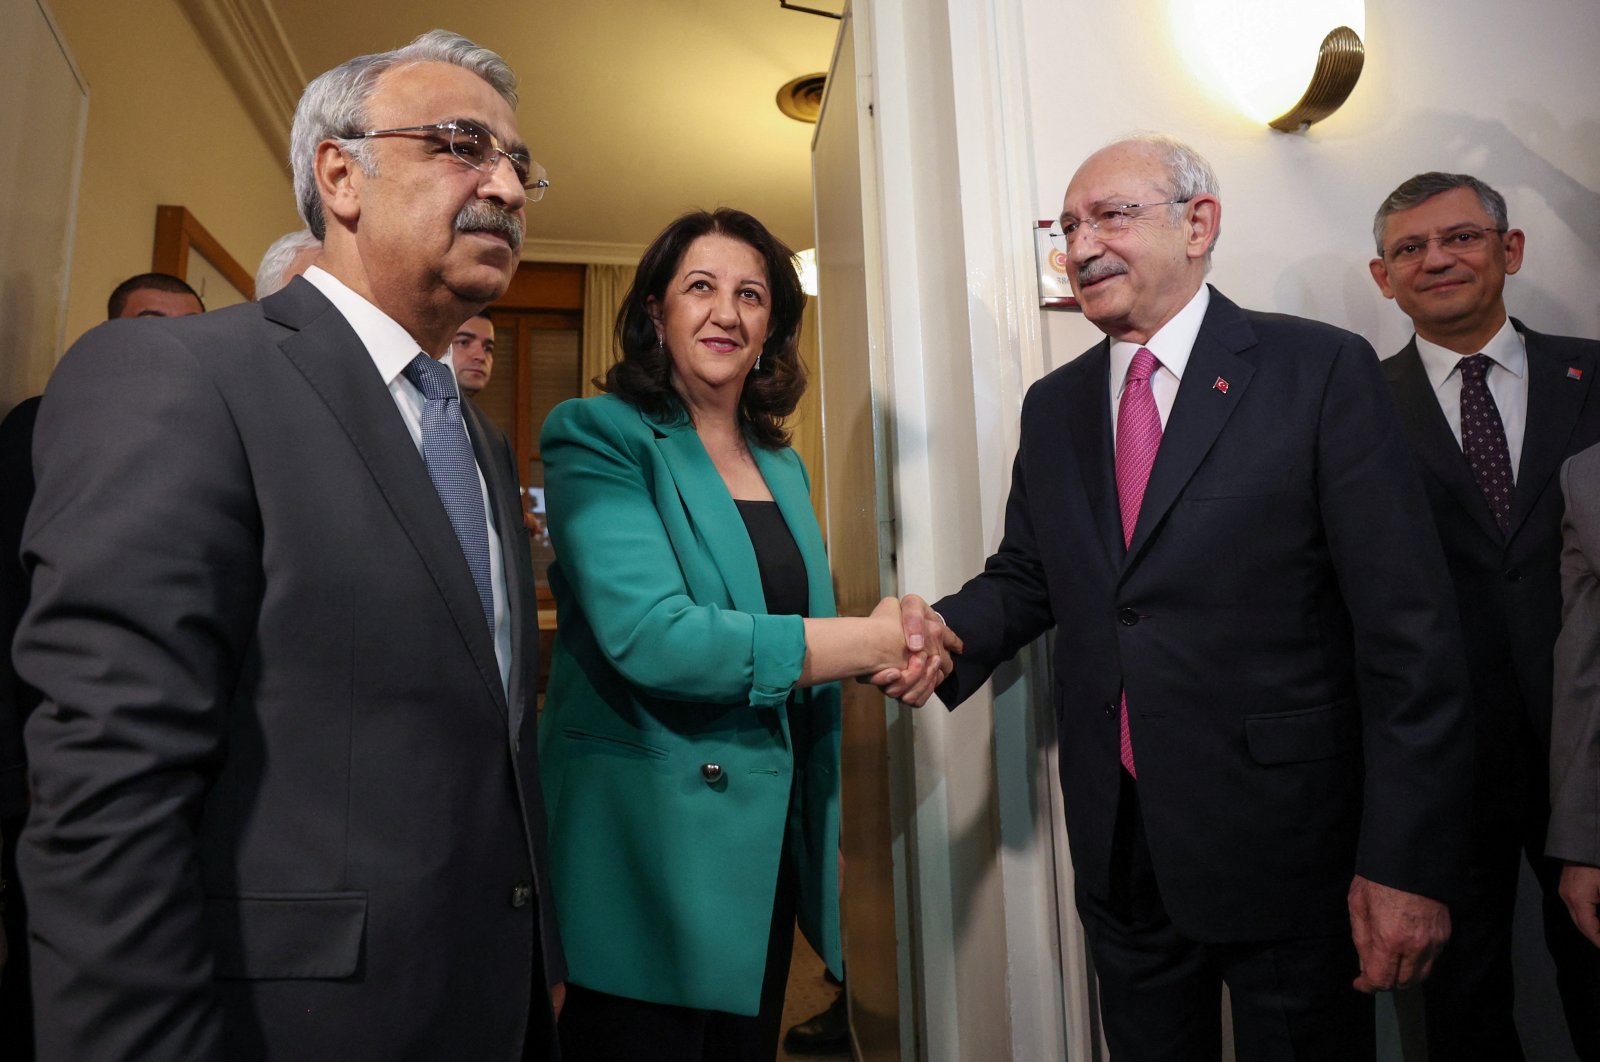 Kemal Kılıçdaroğlu (R), the main opposition Republican People&#039;s Party (CHP) Chair and the presidential candidate of the main opposition alliance in the May elections, meets with co-leaders of the pro-PKK Peoples&#039; Democratic Party (HDP), Pervin Buldan and Mithat Sancar, Ankara, Türkiye, March 20, 2023. (Reuters Photo)